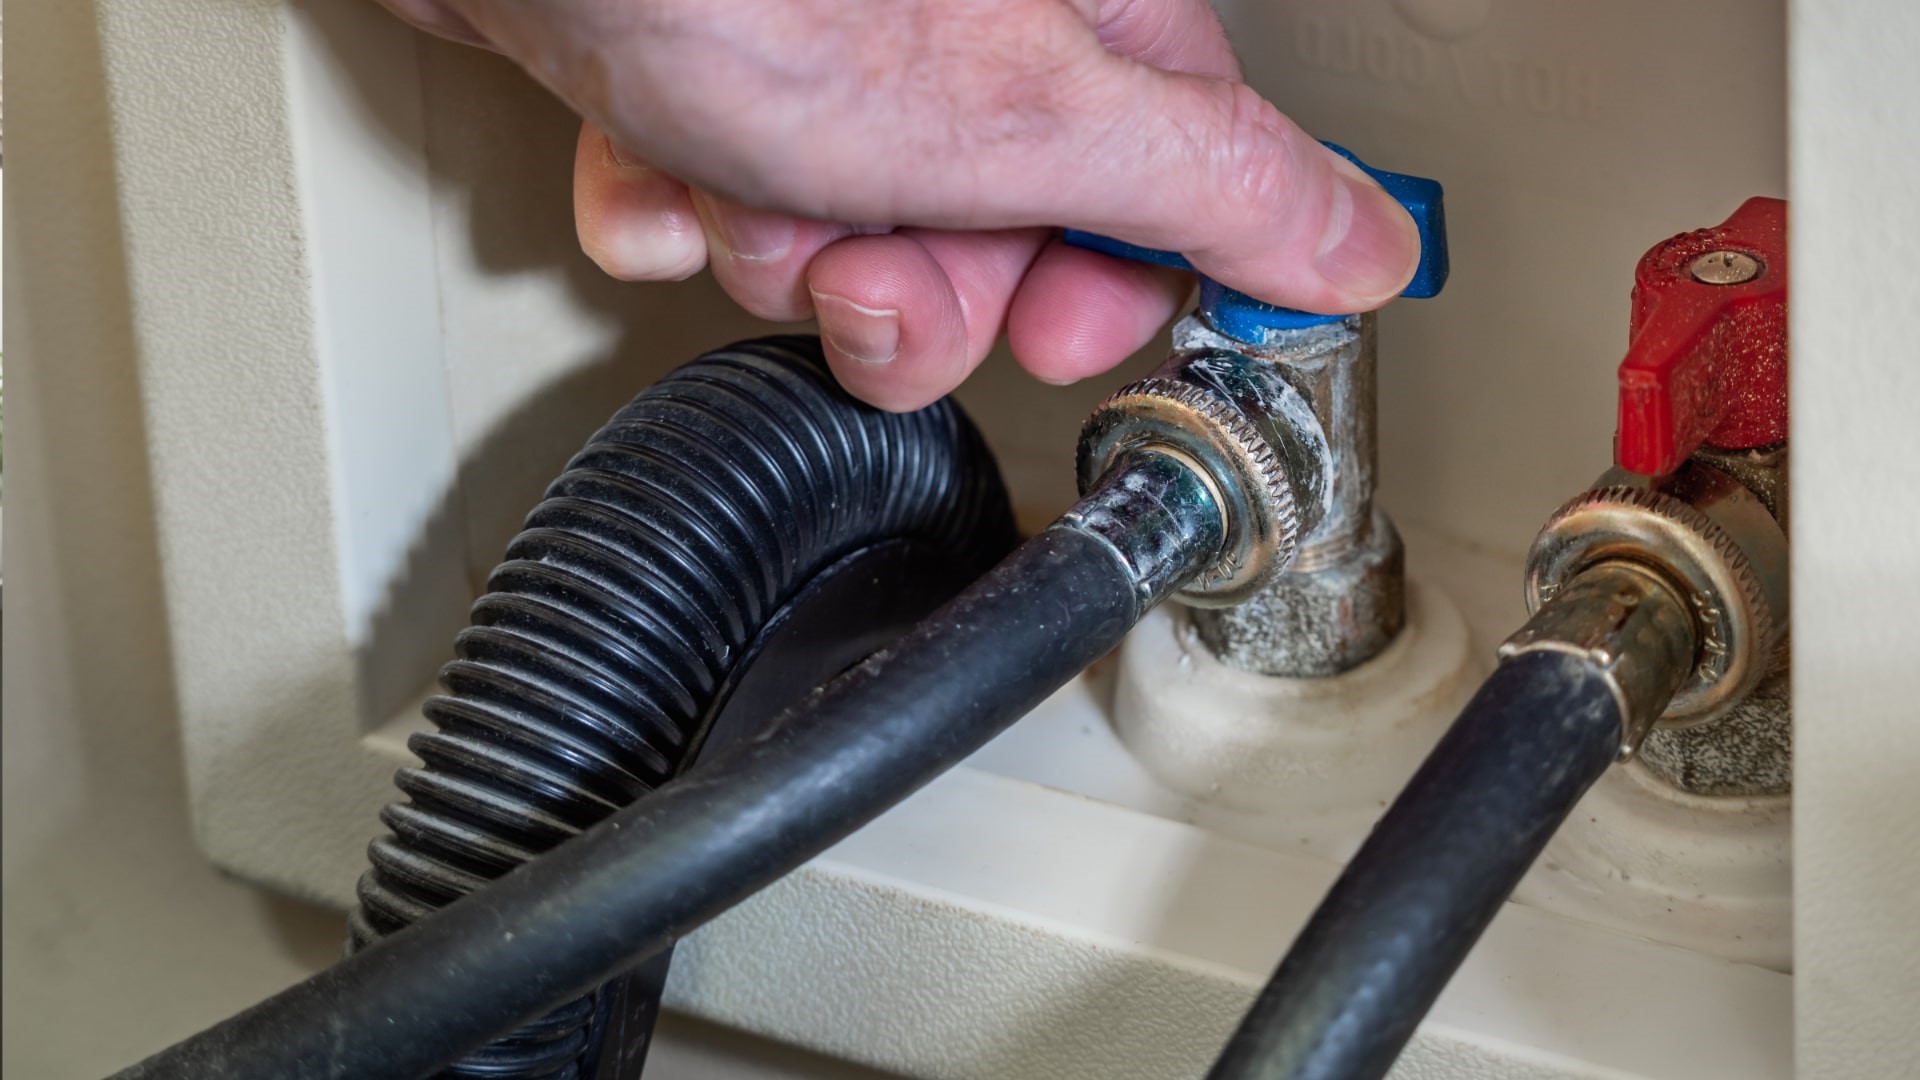 How To Replace Washing Machine Water Valves